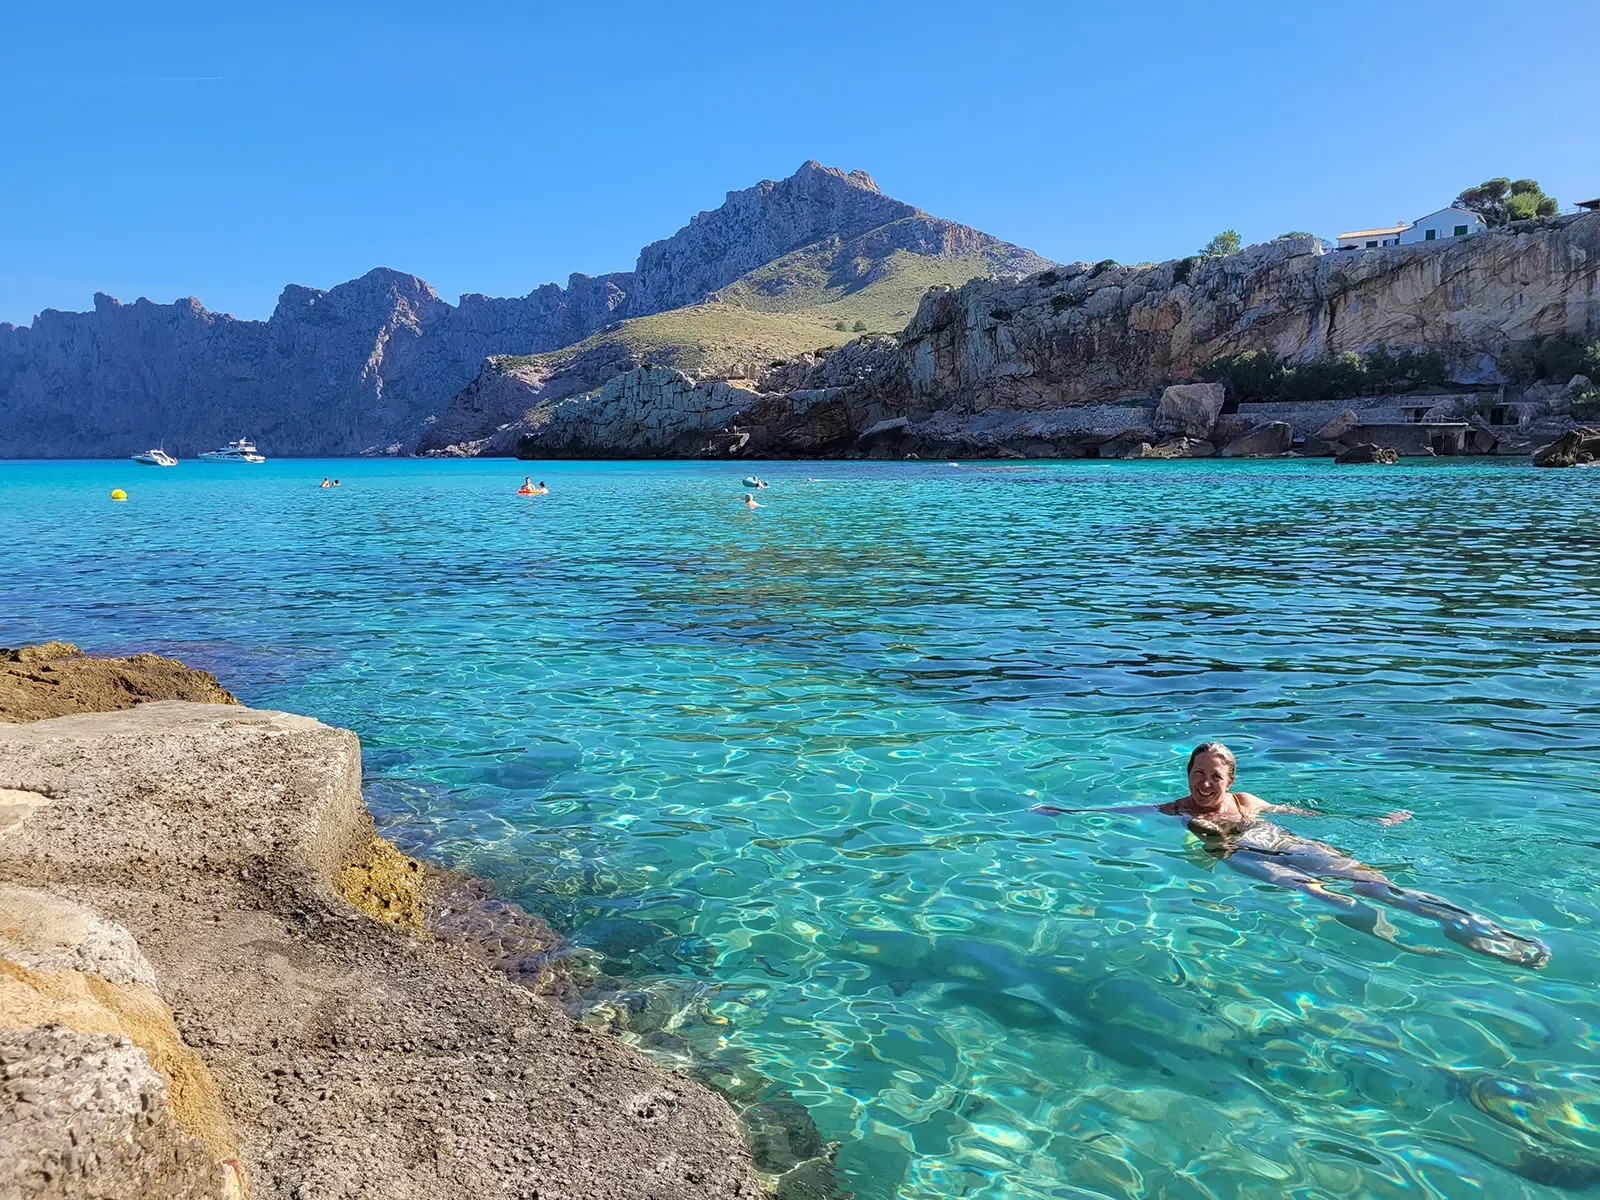 Person swimming in clear blue water in Mallorca.